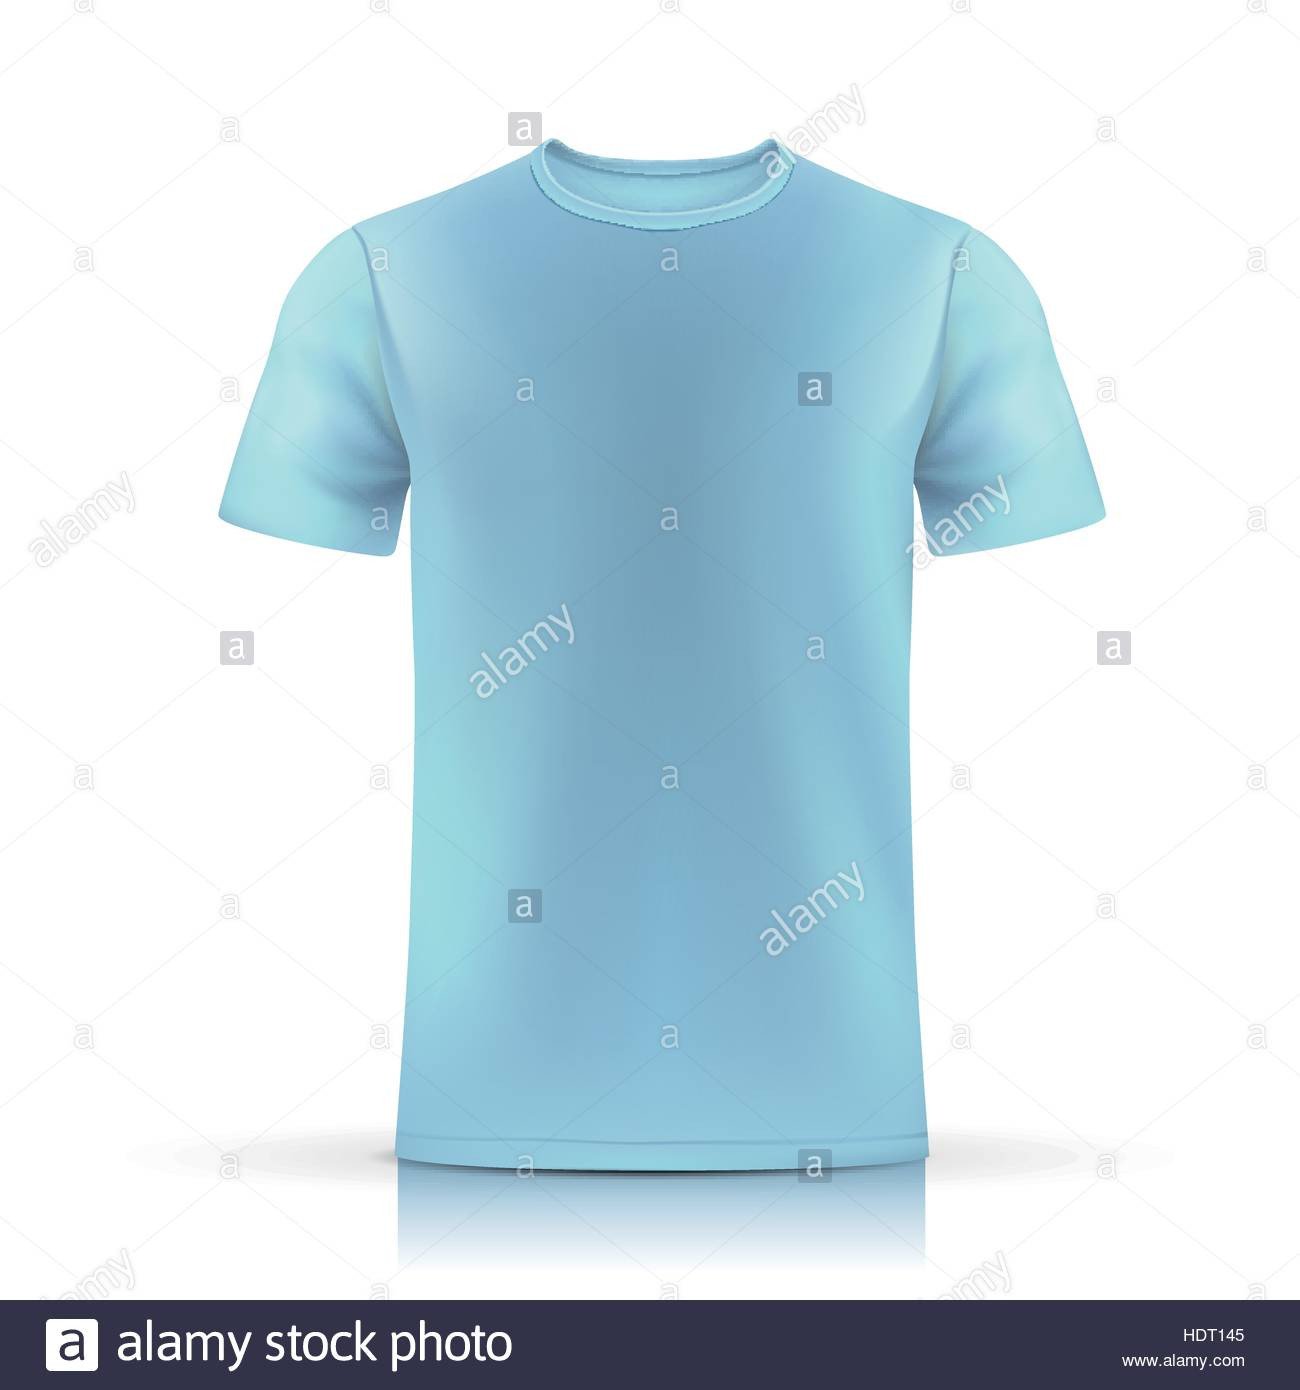 light blue T shirt template isolated on white background